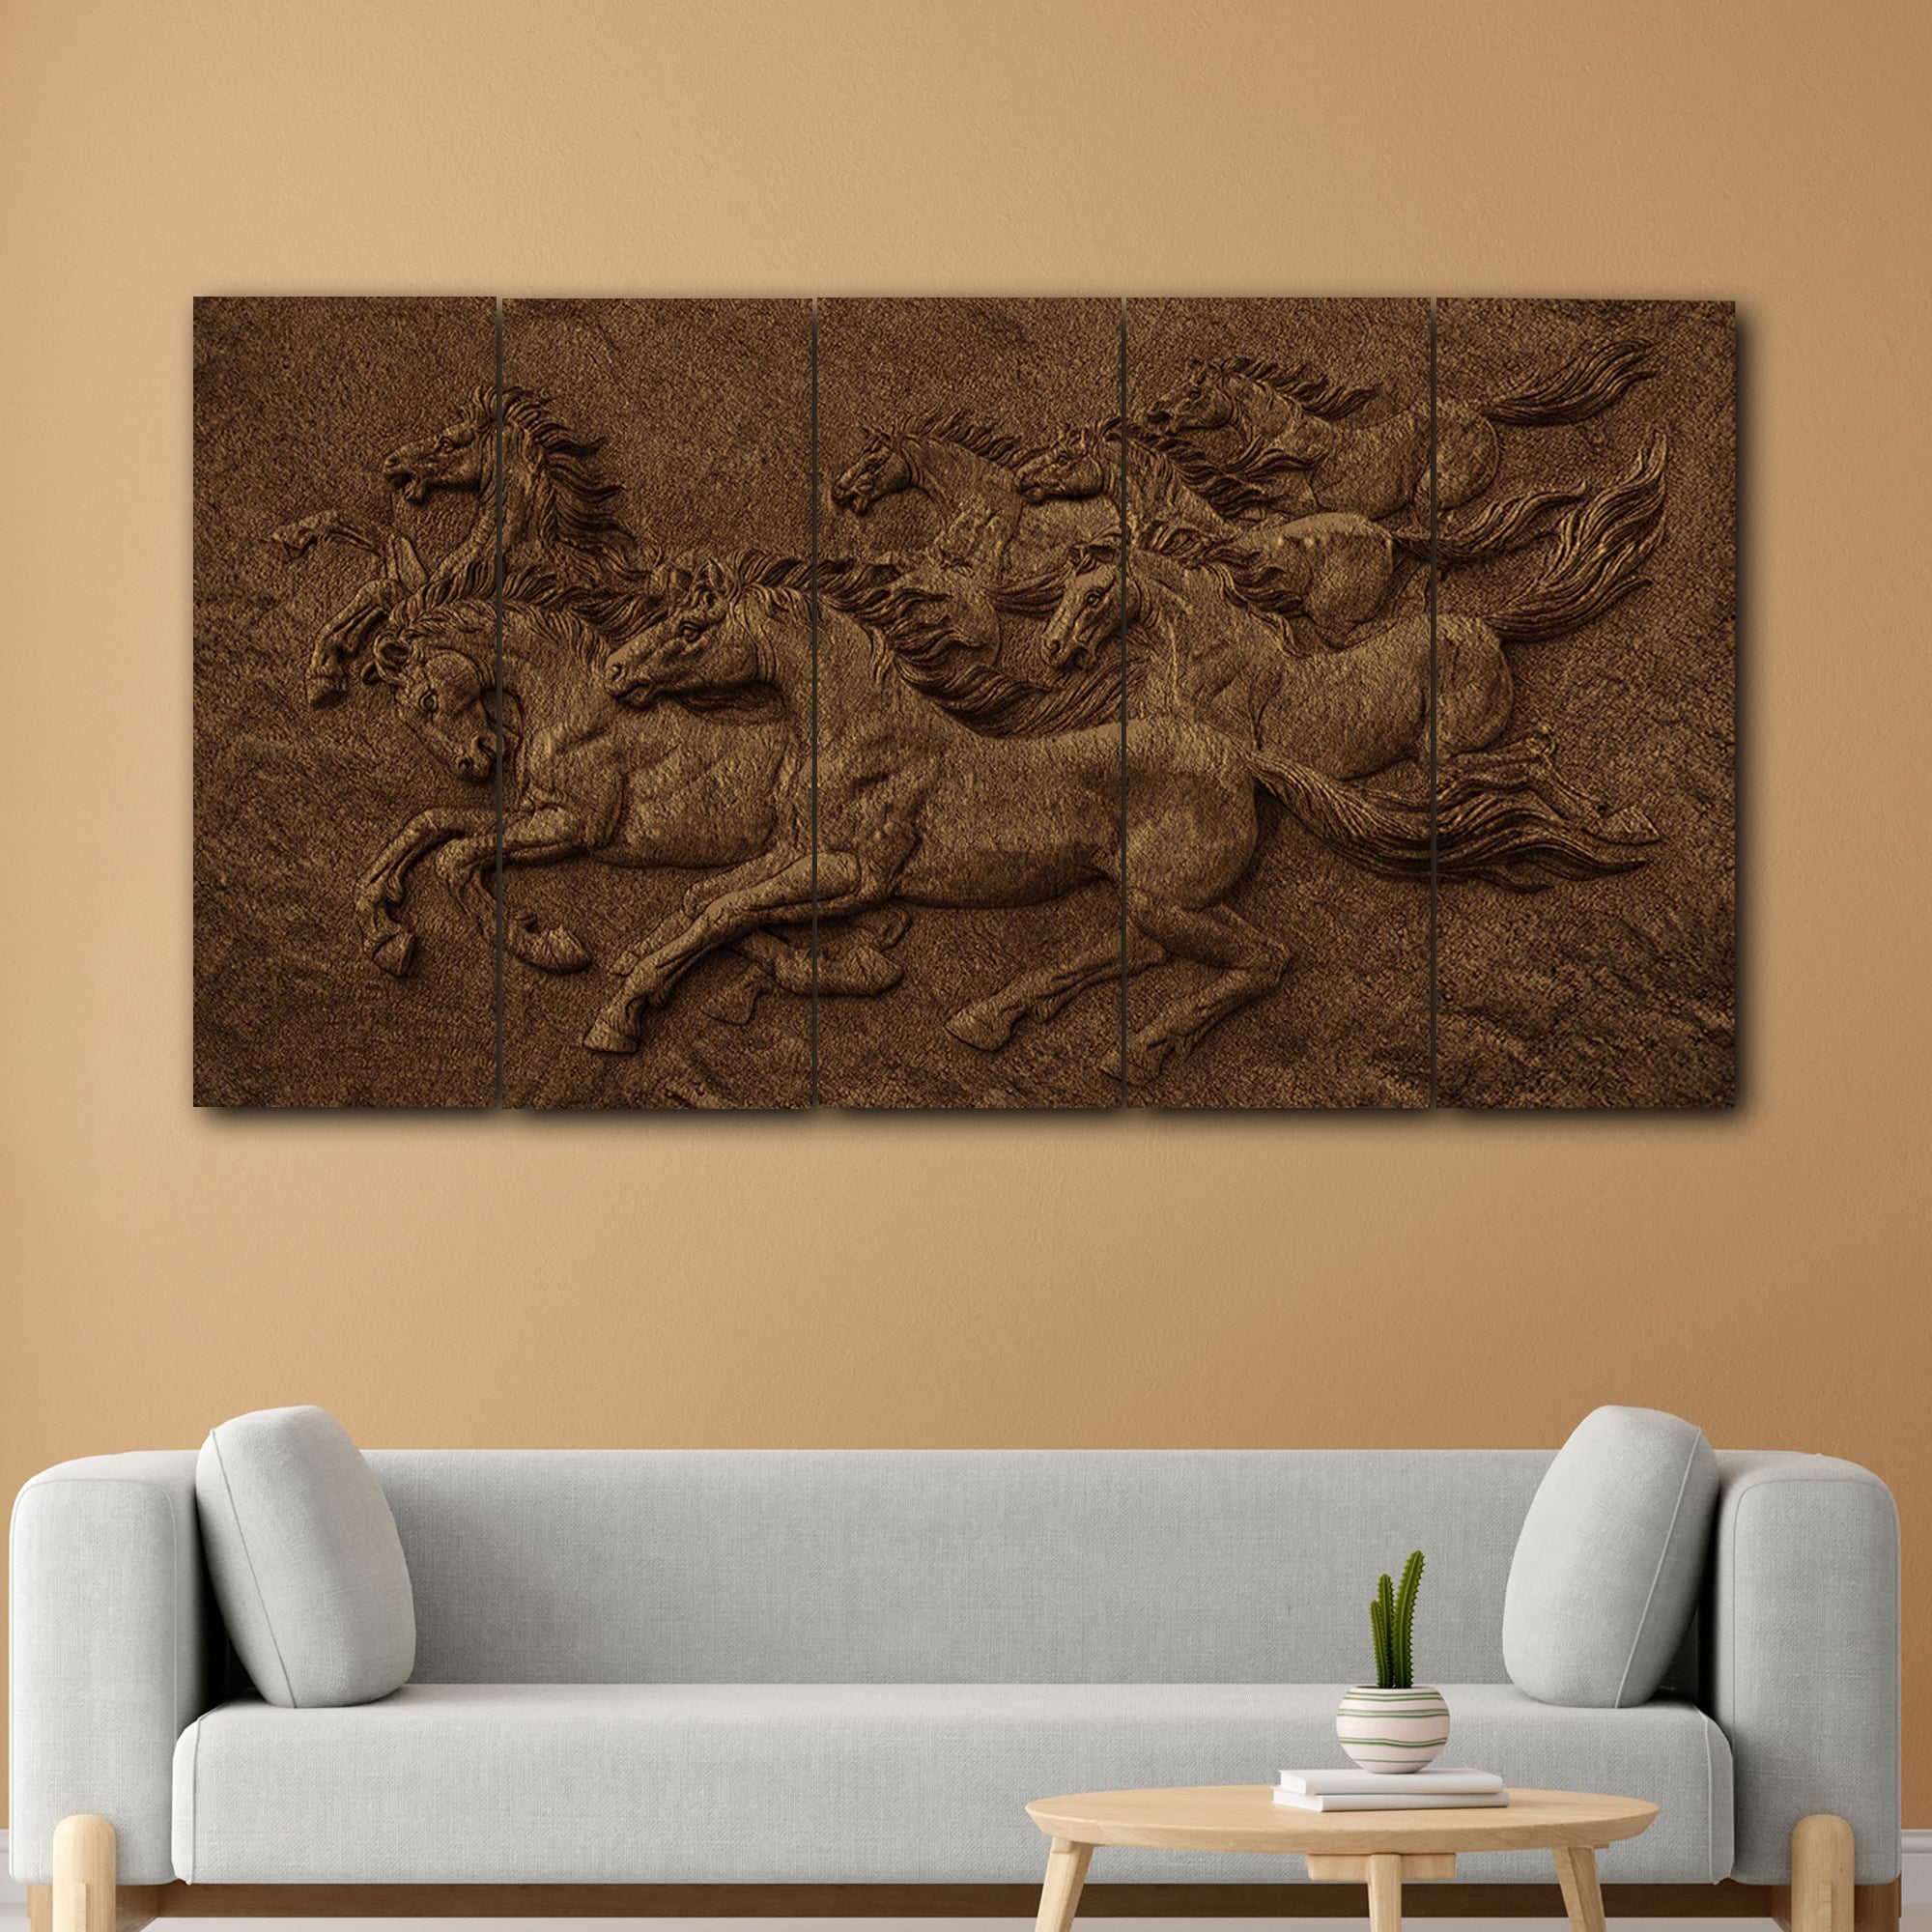 Runing Seven Horses In 5 Panel Painting